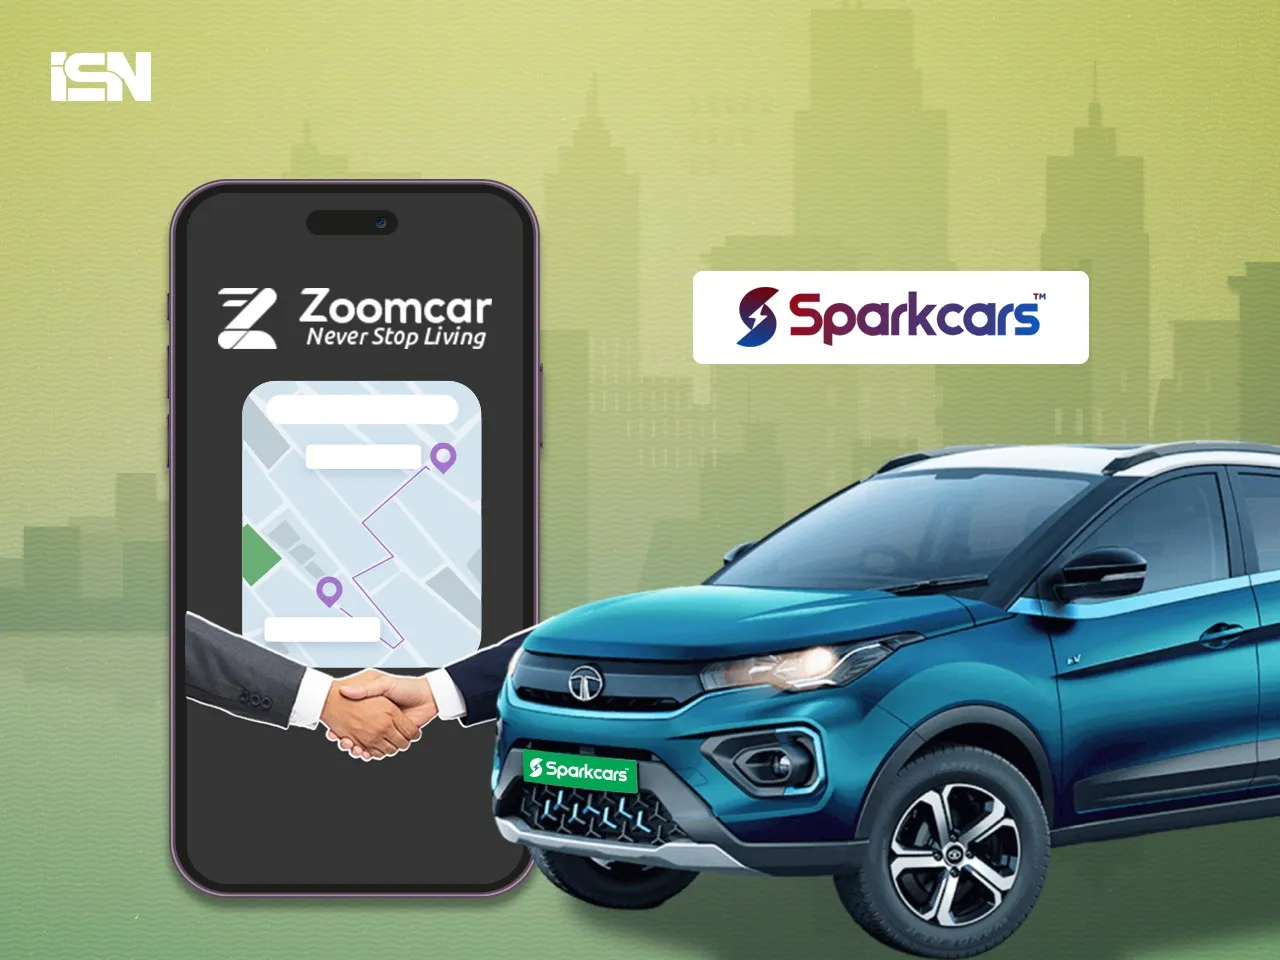 Zoomcar partners with SPARKCARS to boost electric car adoption in self-drive space